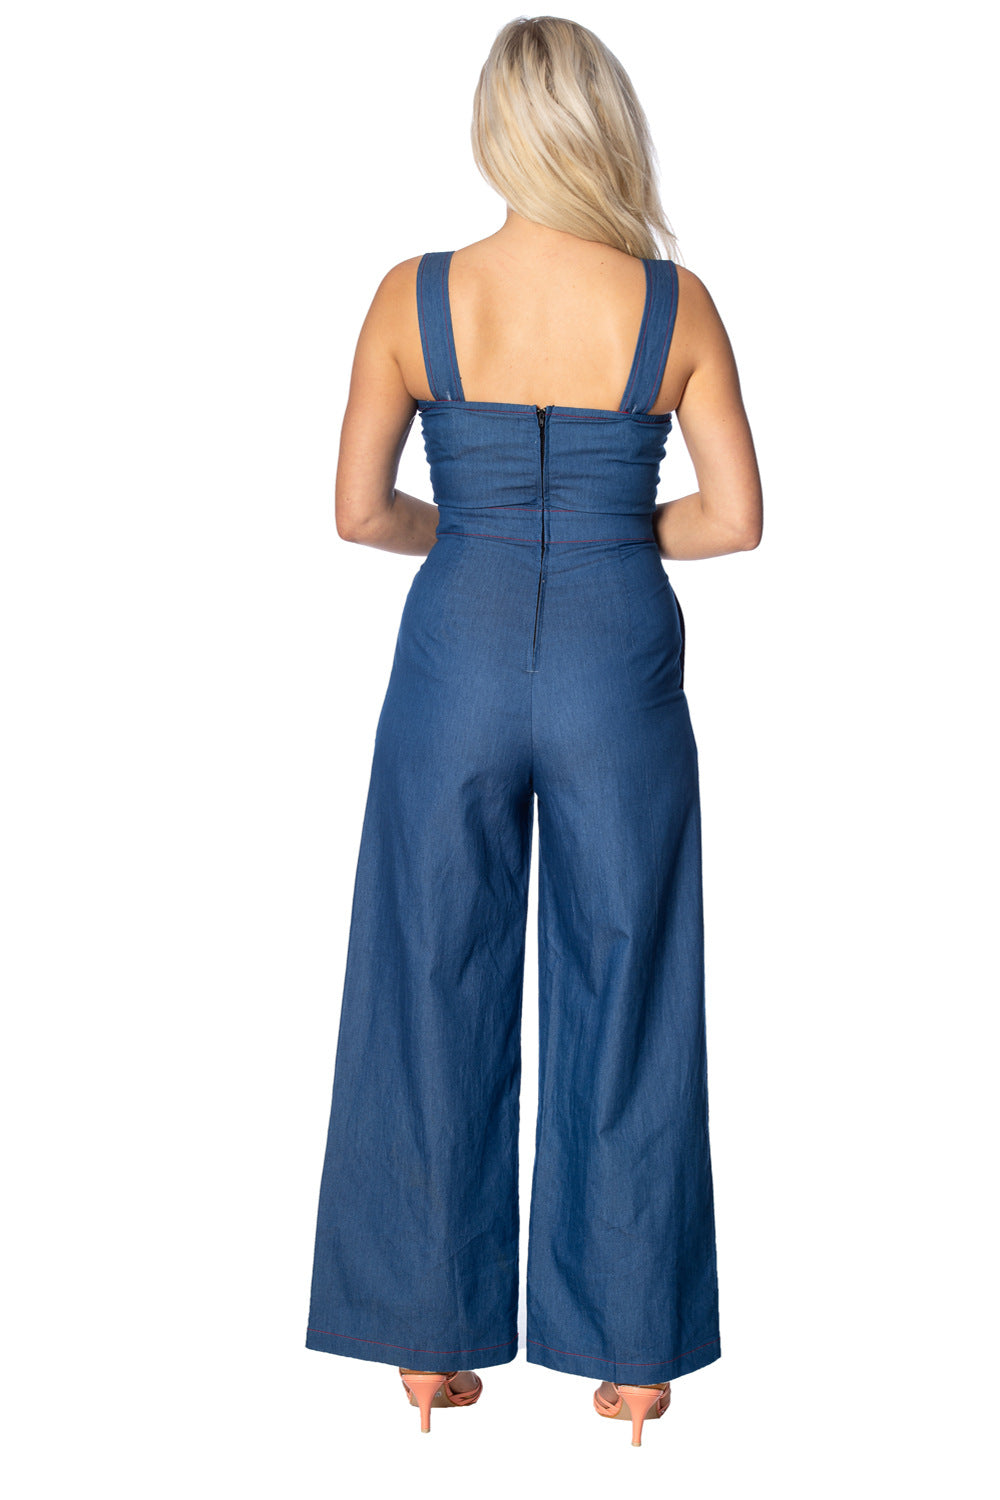 Seaside Diner 50s Jumpsuit by Banned